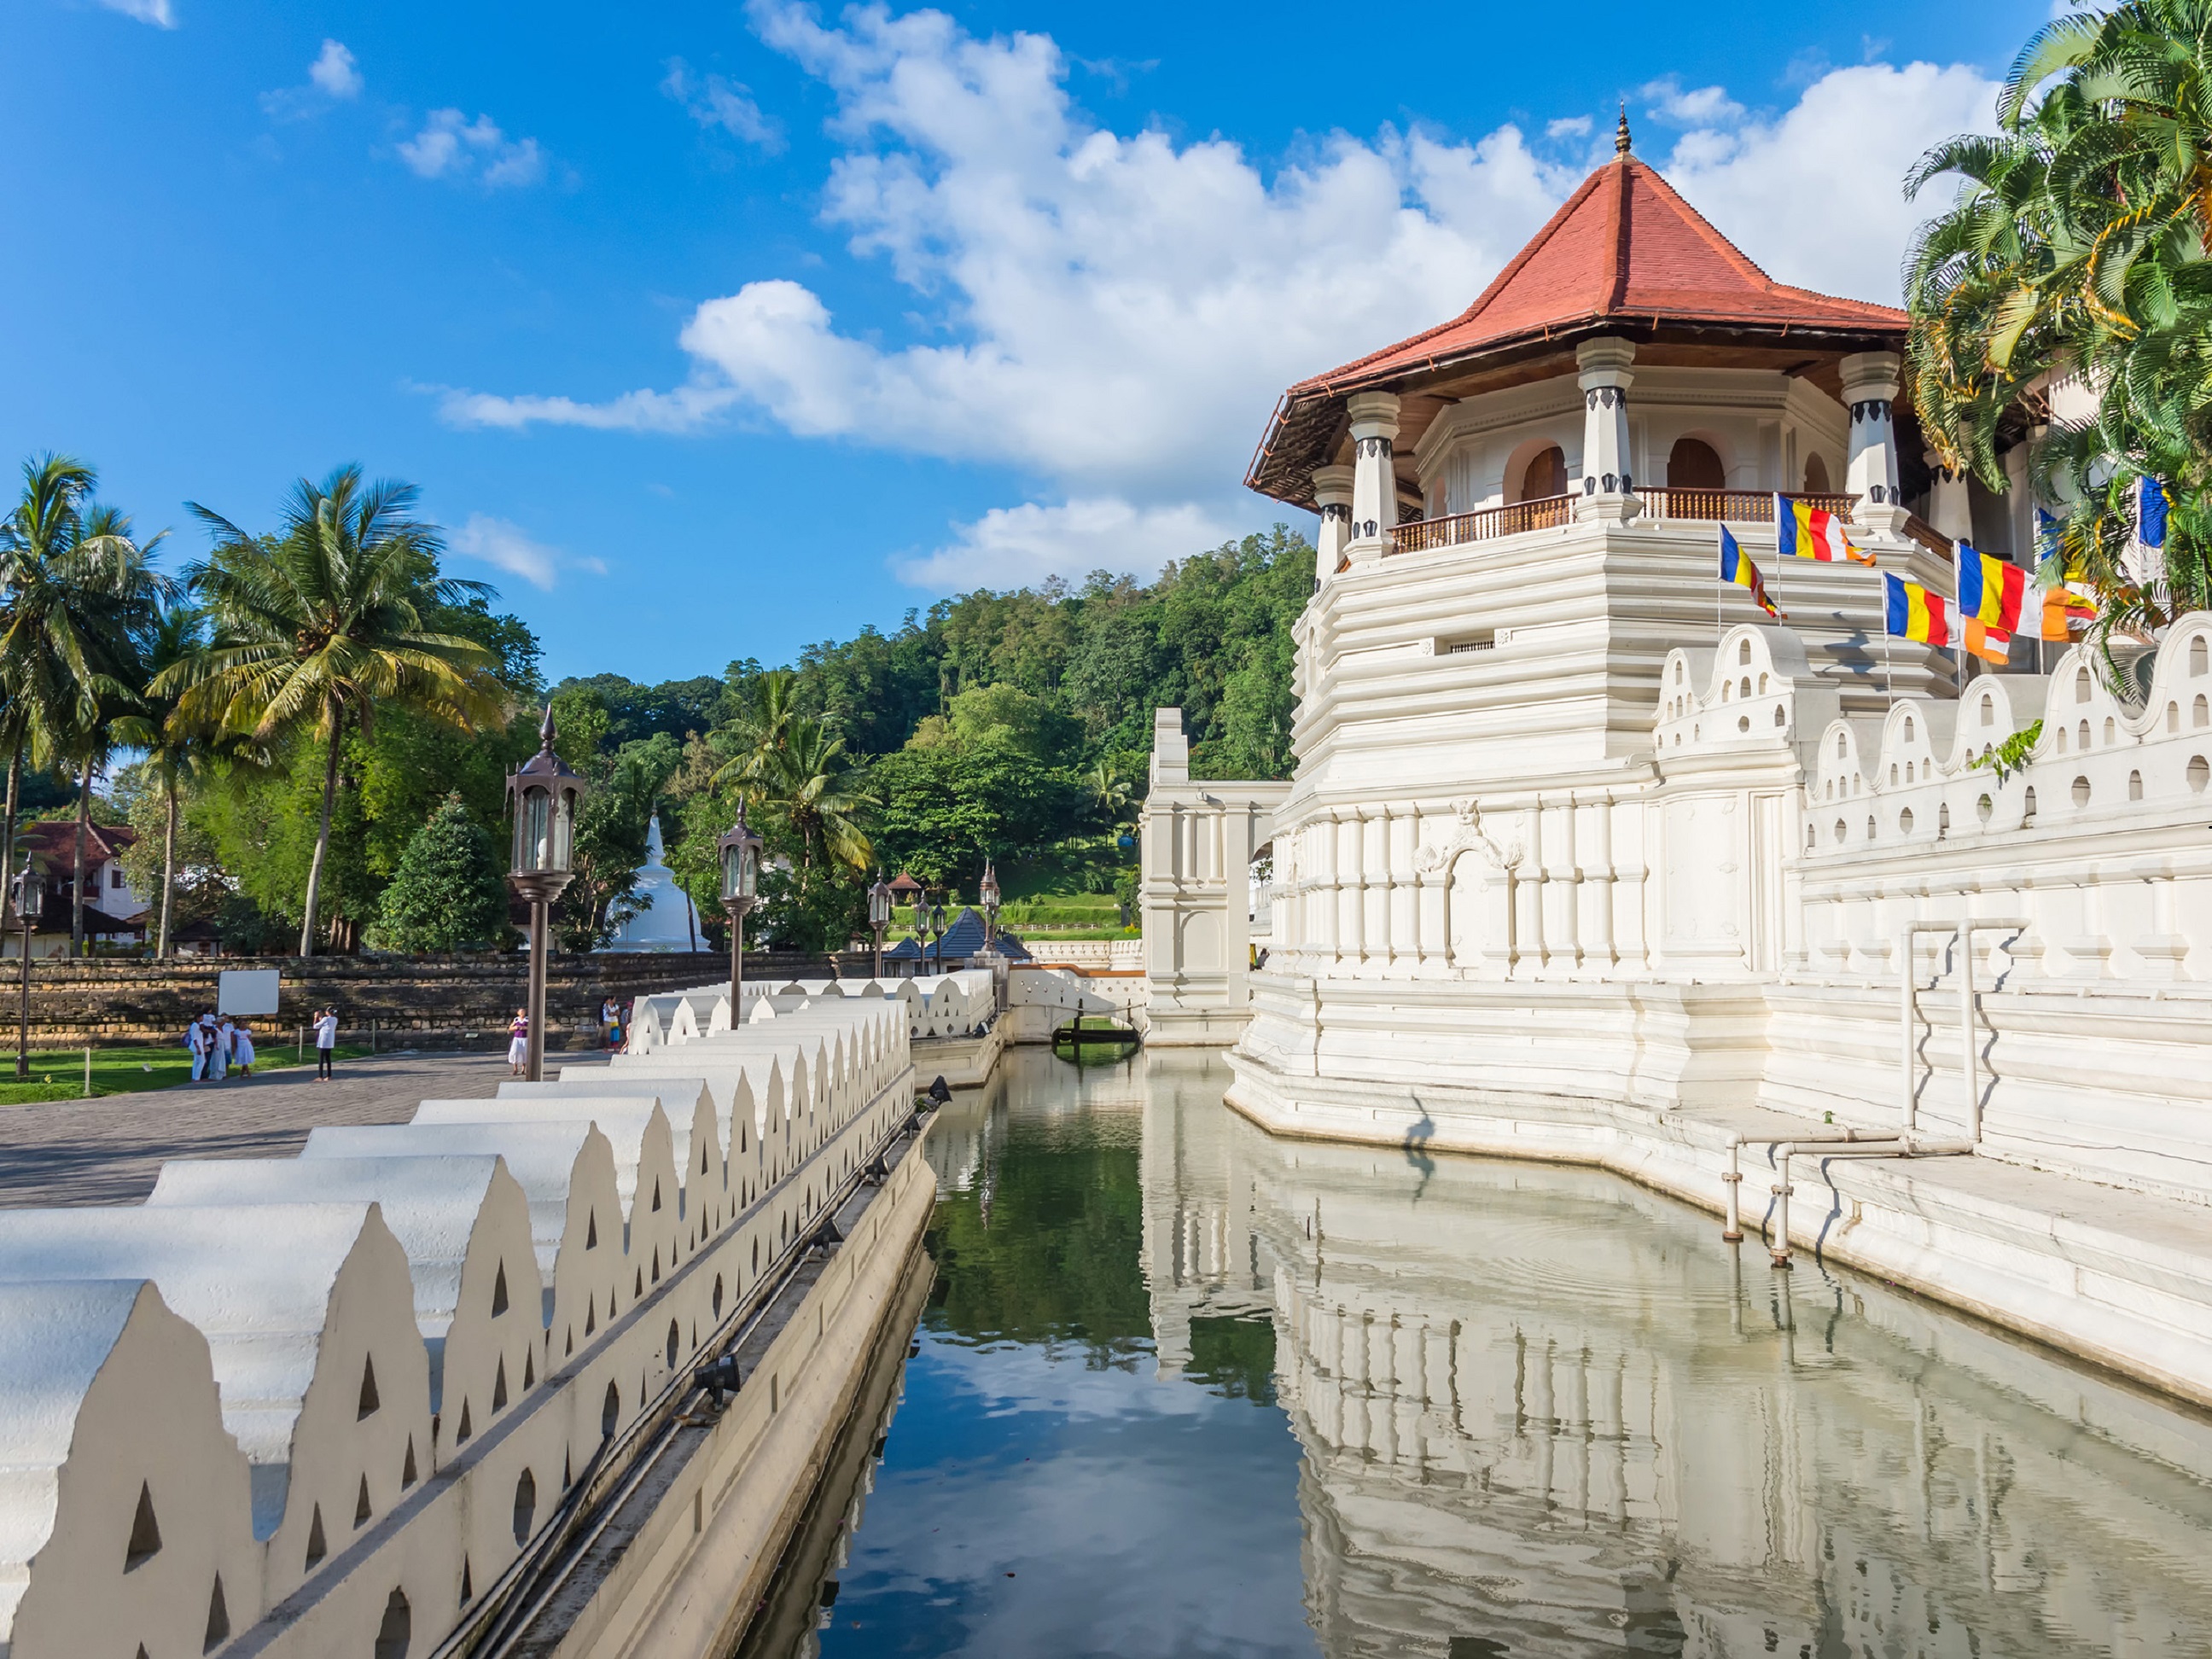 Temple of the tooth in Kandy